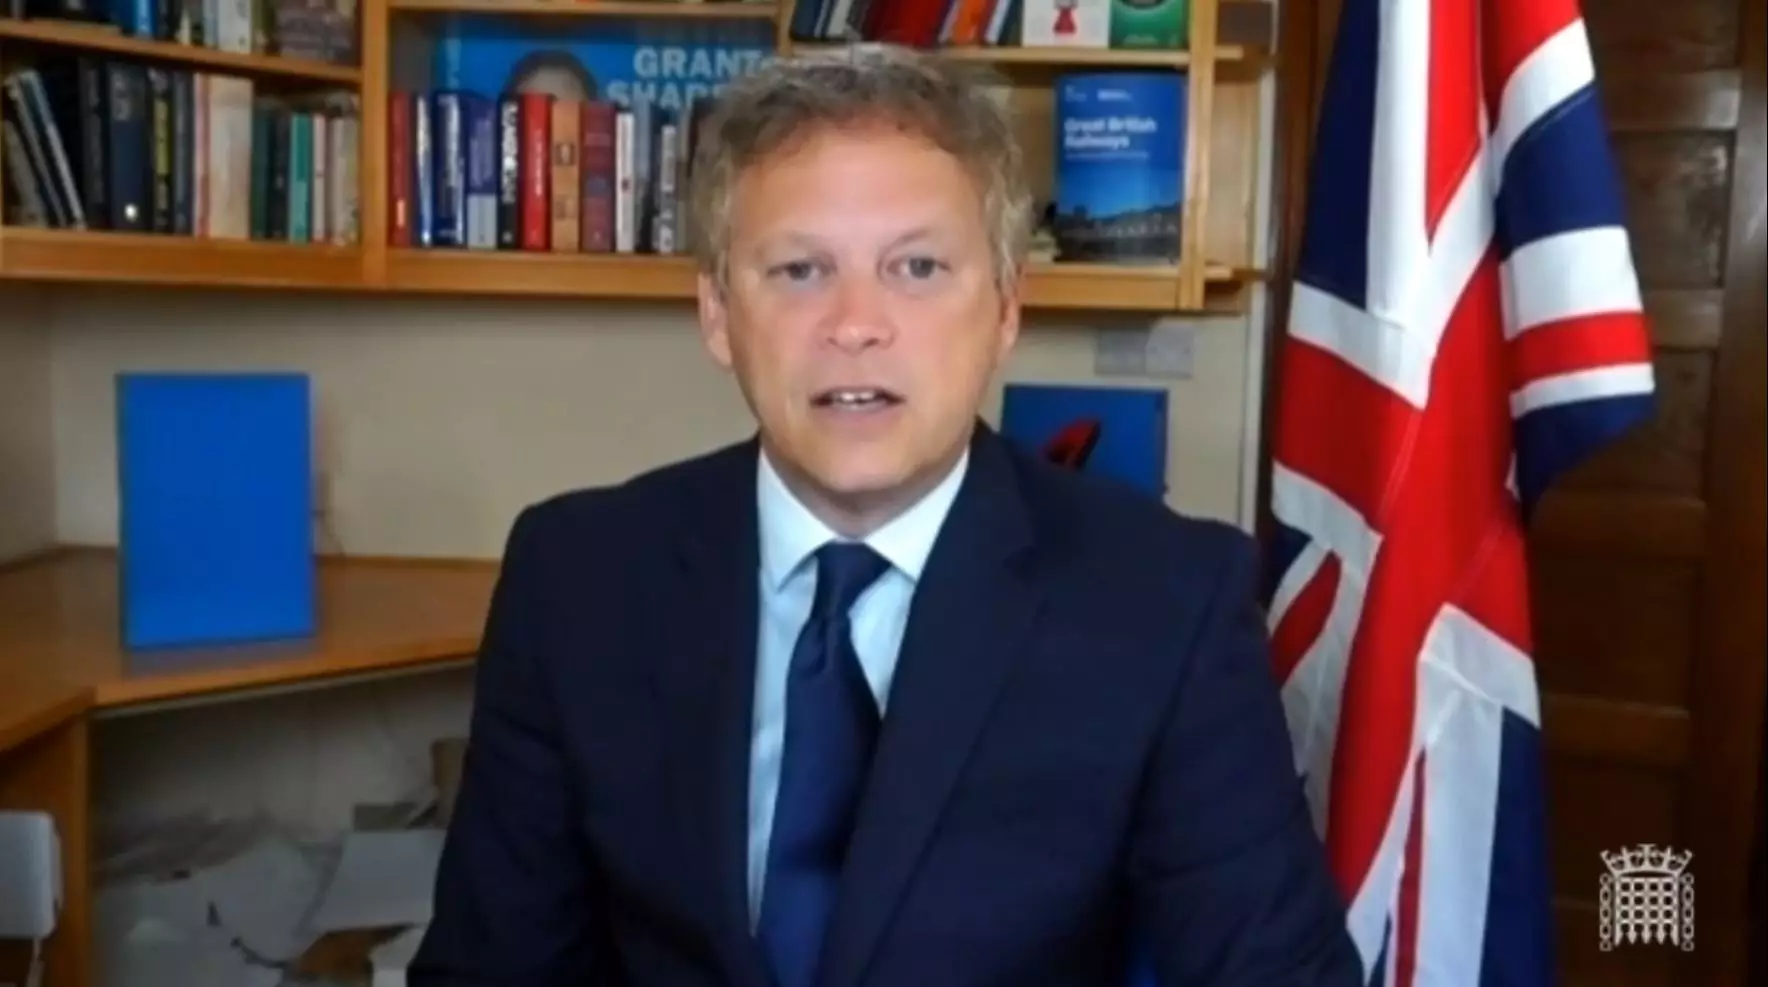 Grant Shapps addressed parliament with updated travel rules (